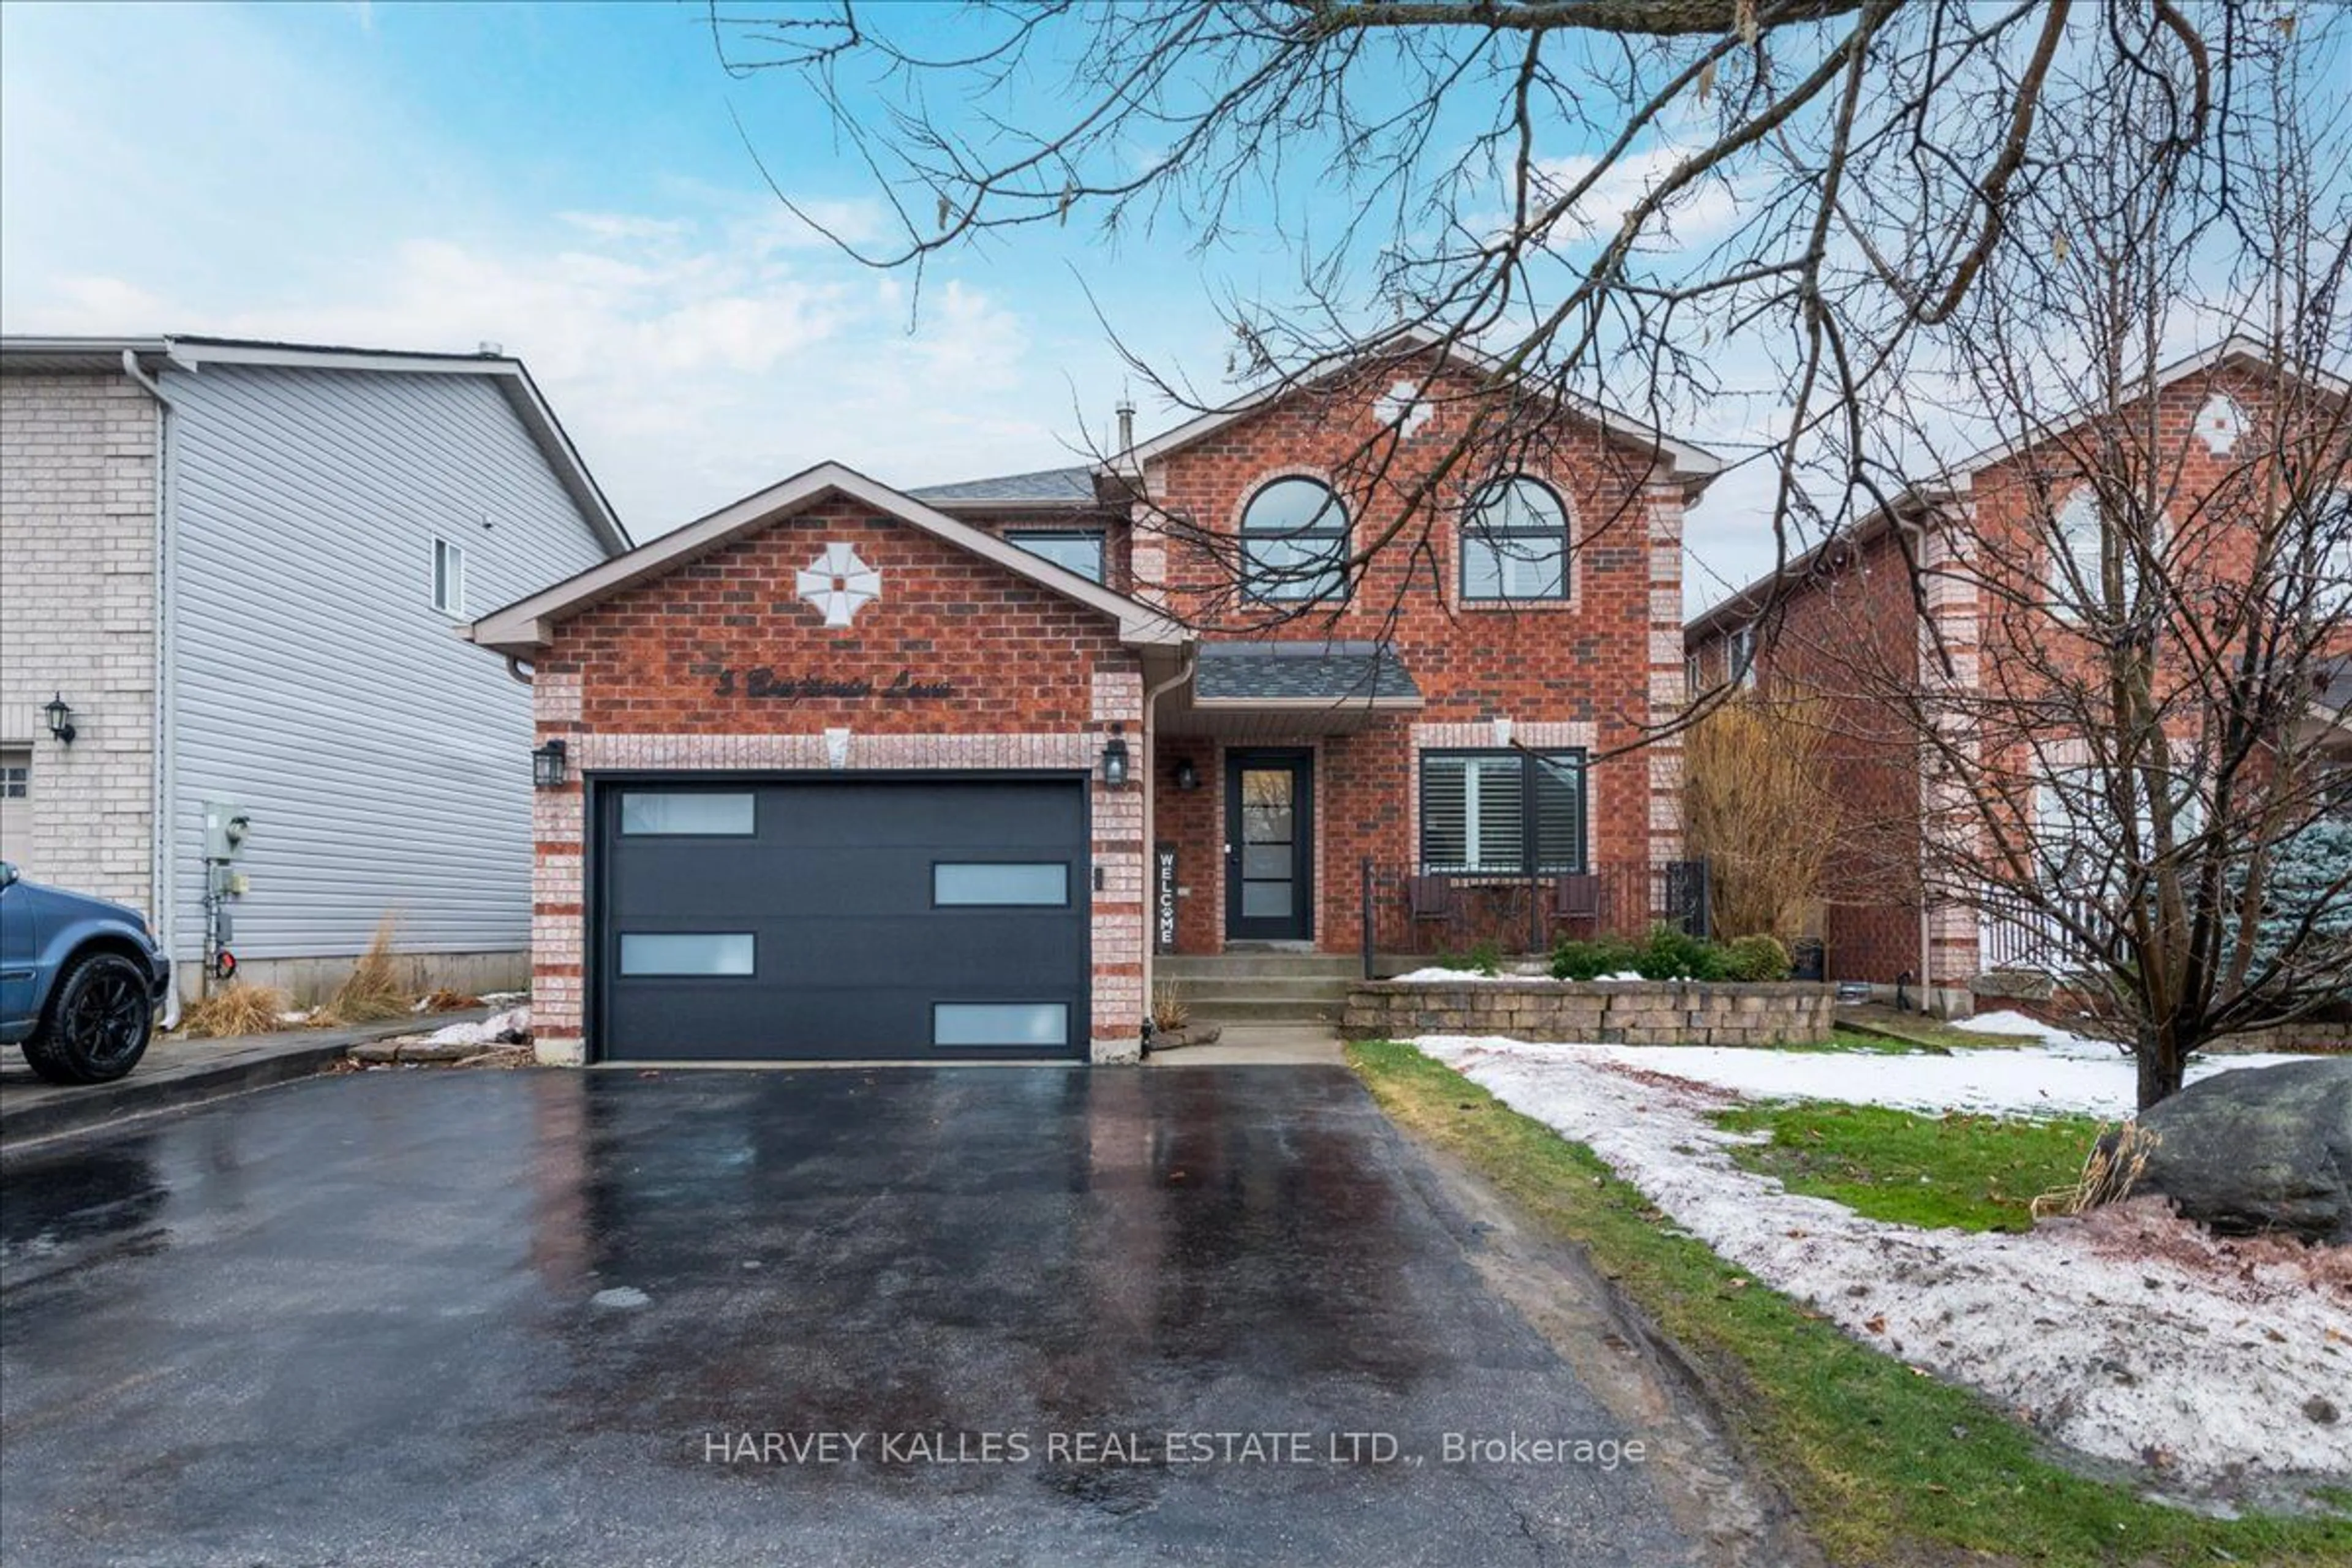 Home with brick exterior material for 5 Benjamin Lane, Barrie Ontario L4N 0S3